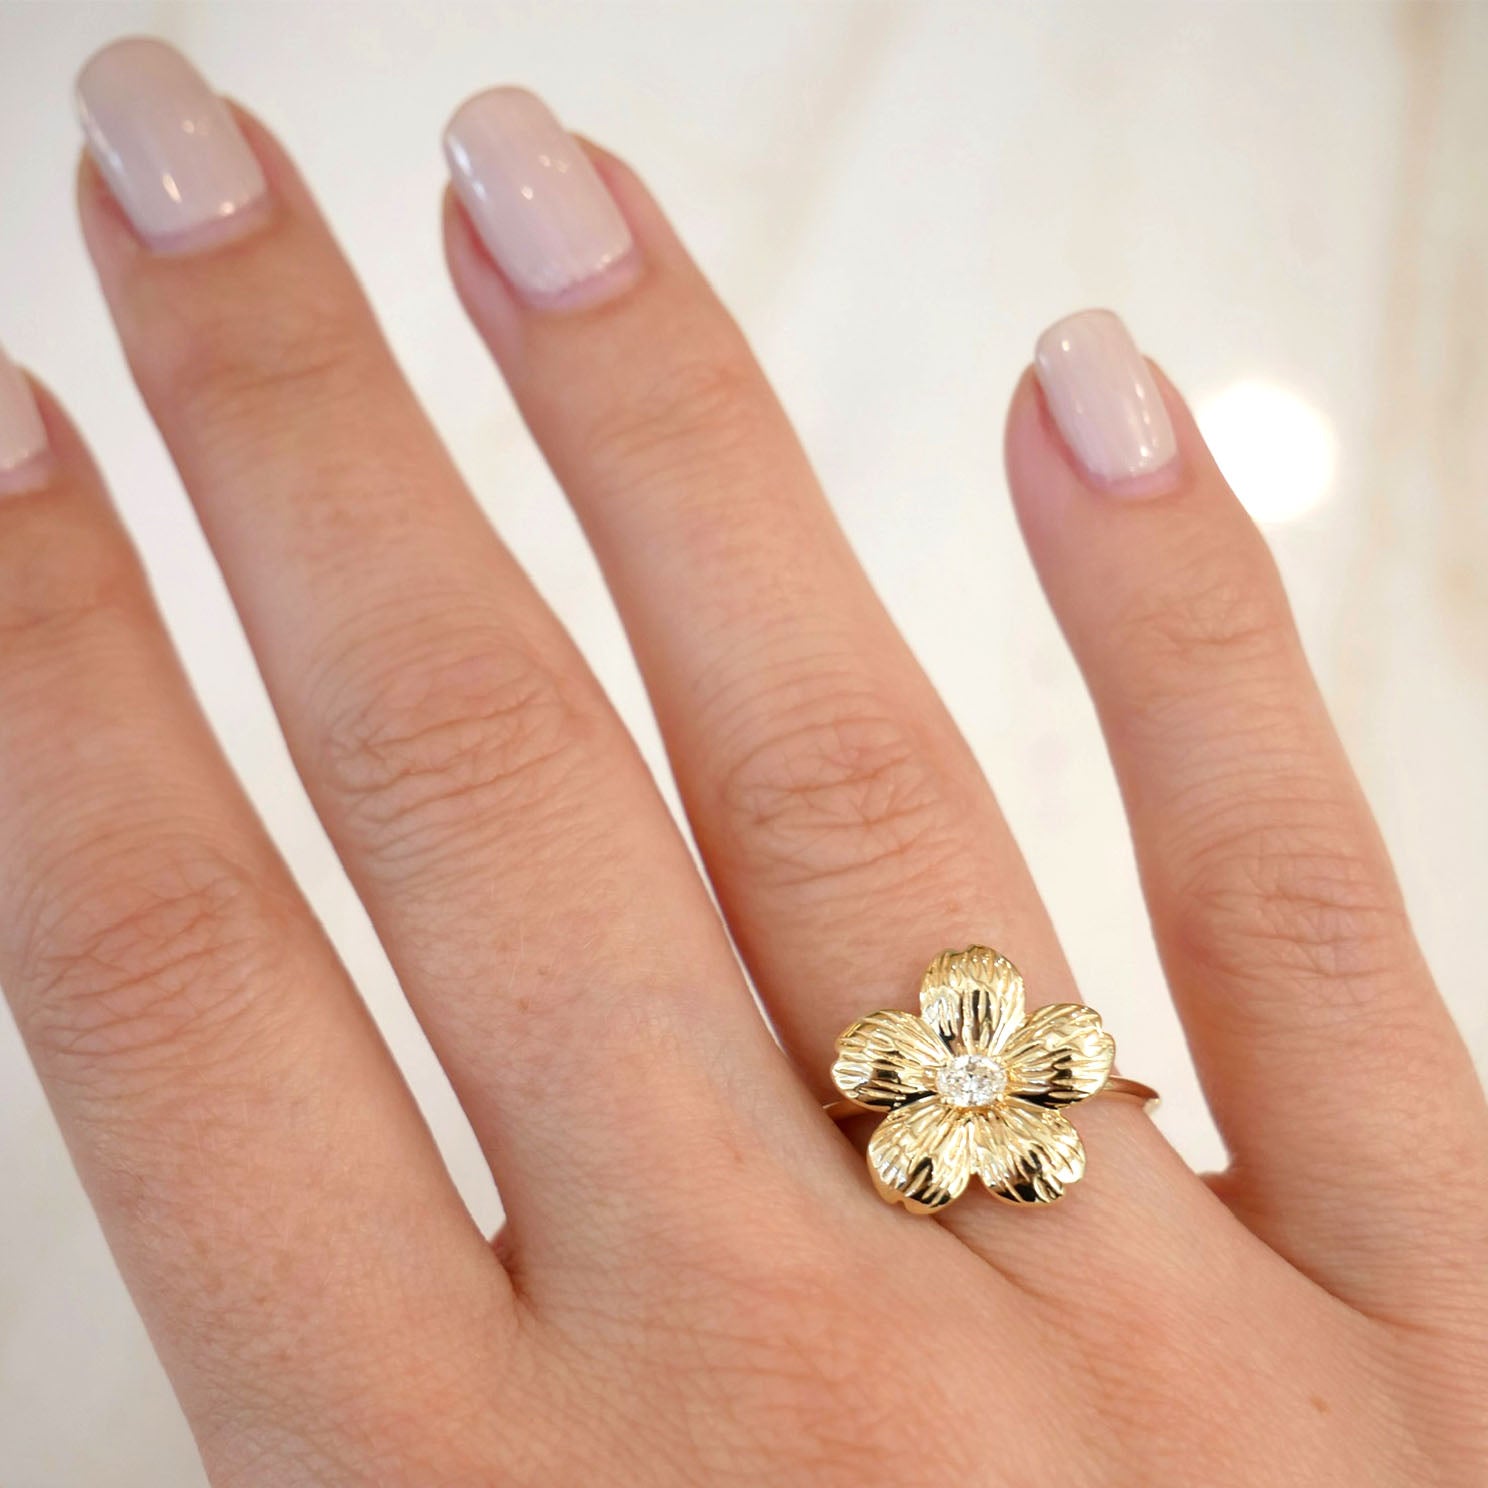 Cherry Blossom Ring in 14k yellow gold styled on ring finger of model